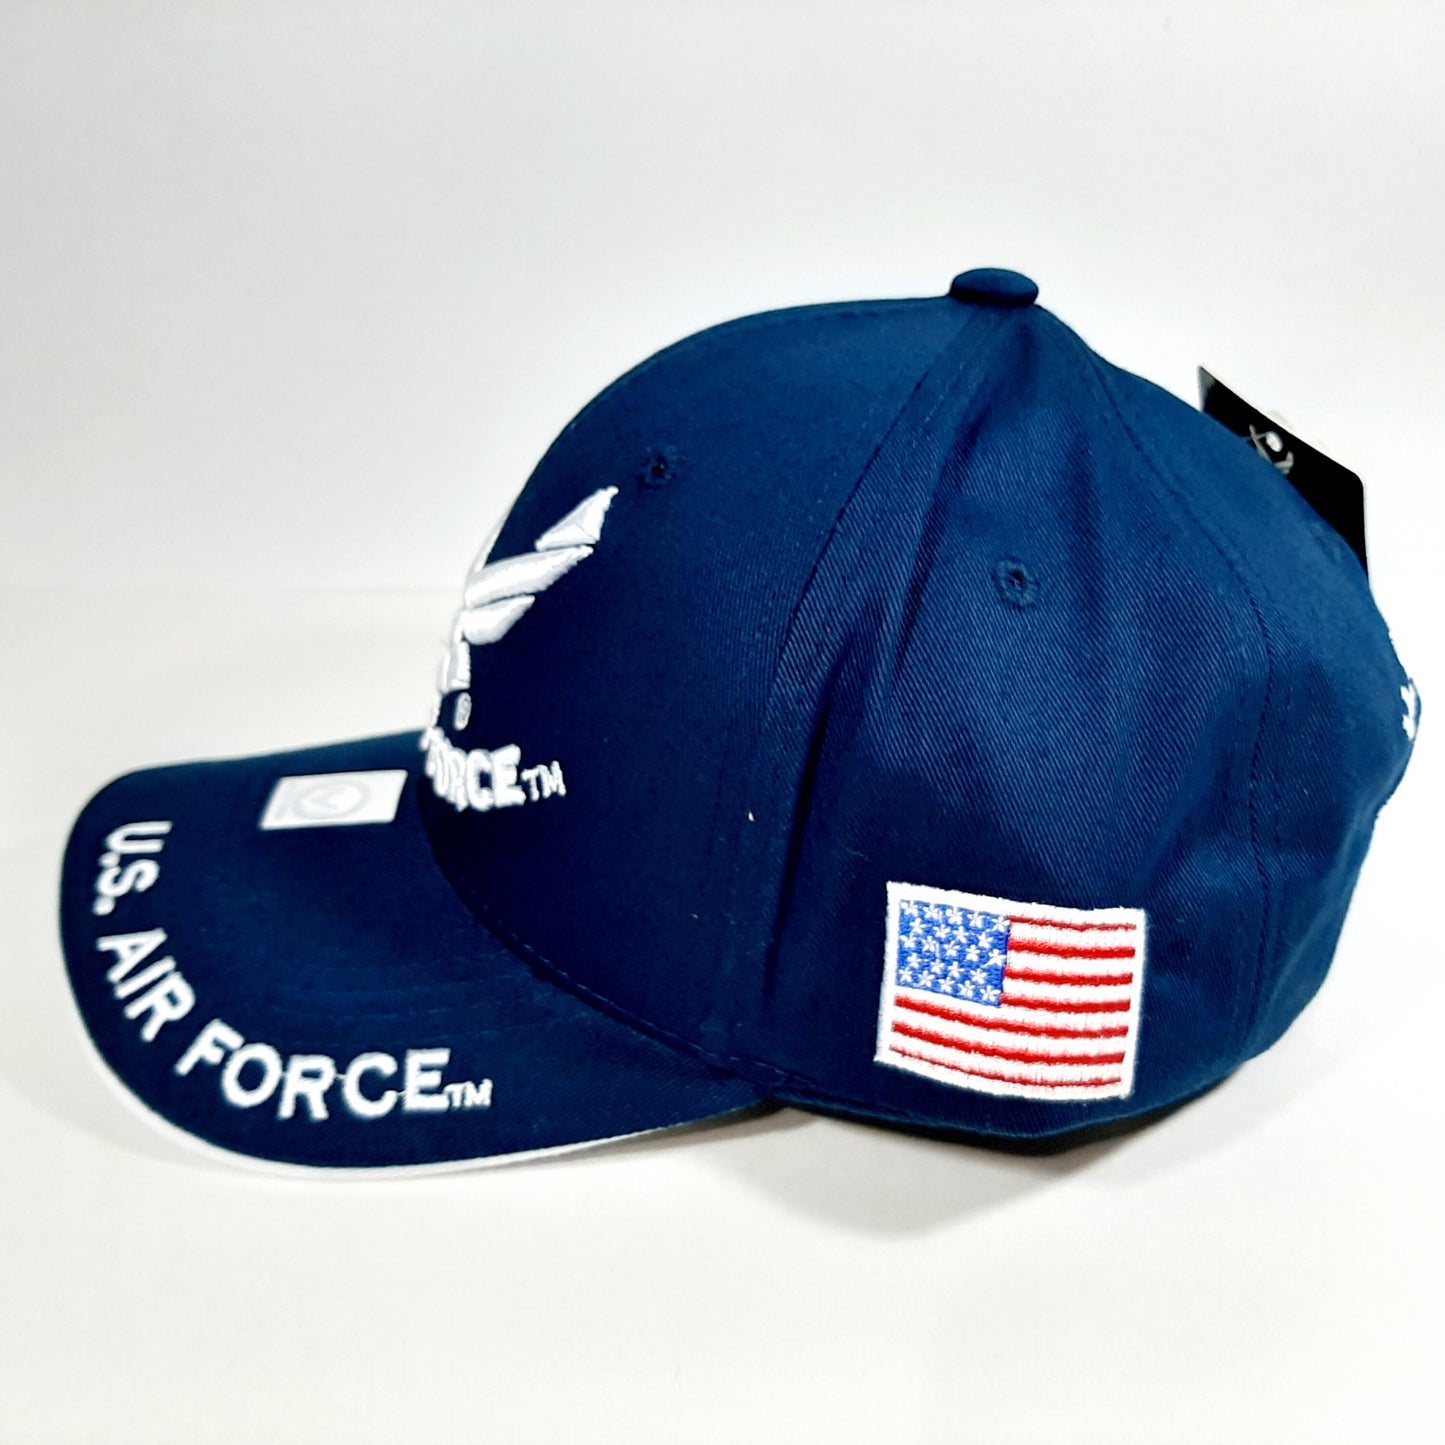 U.S. Air Force Wings Hat Navy Blue US Flag Puff Embroidered Baseball Cap Cotton